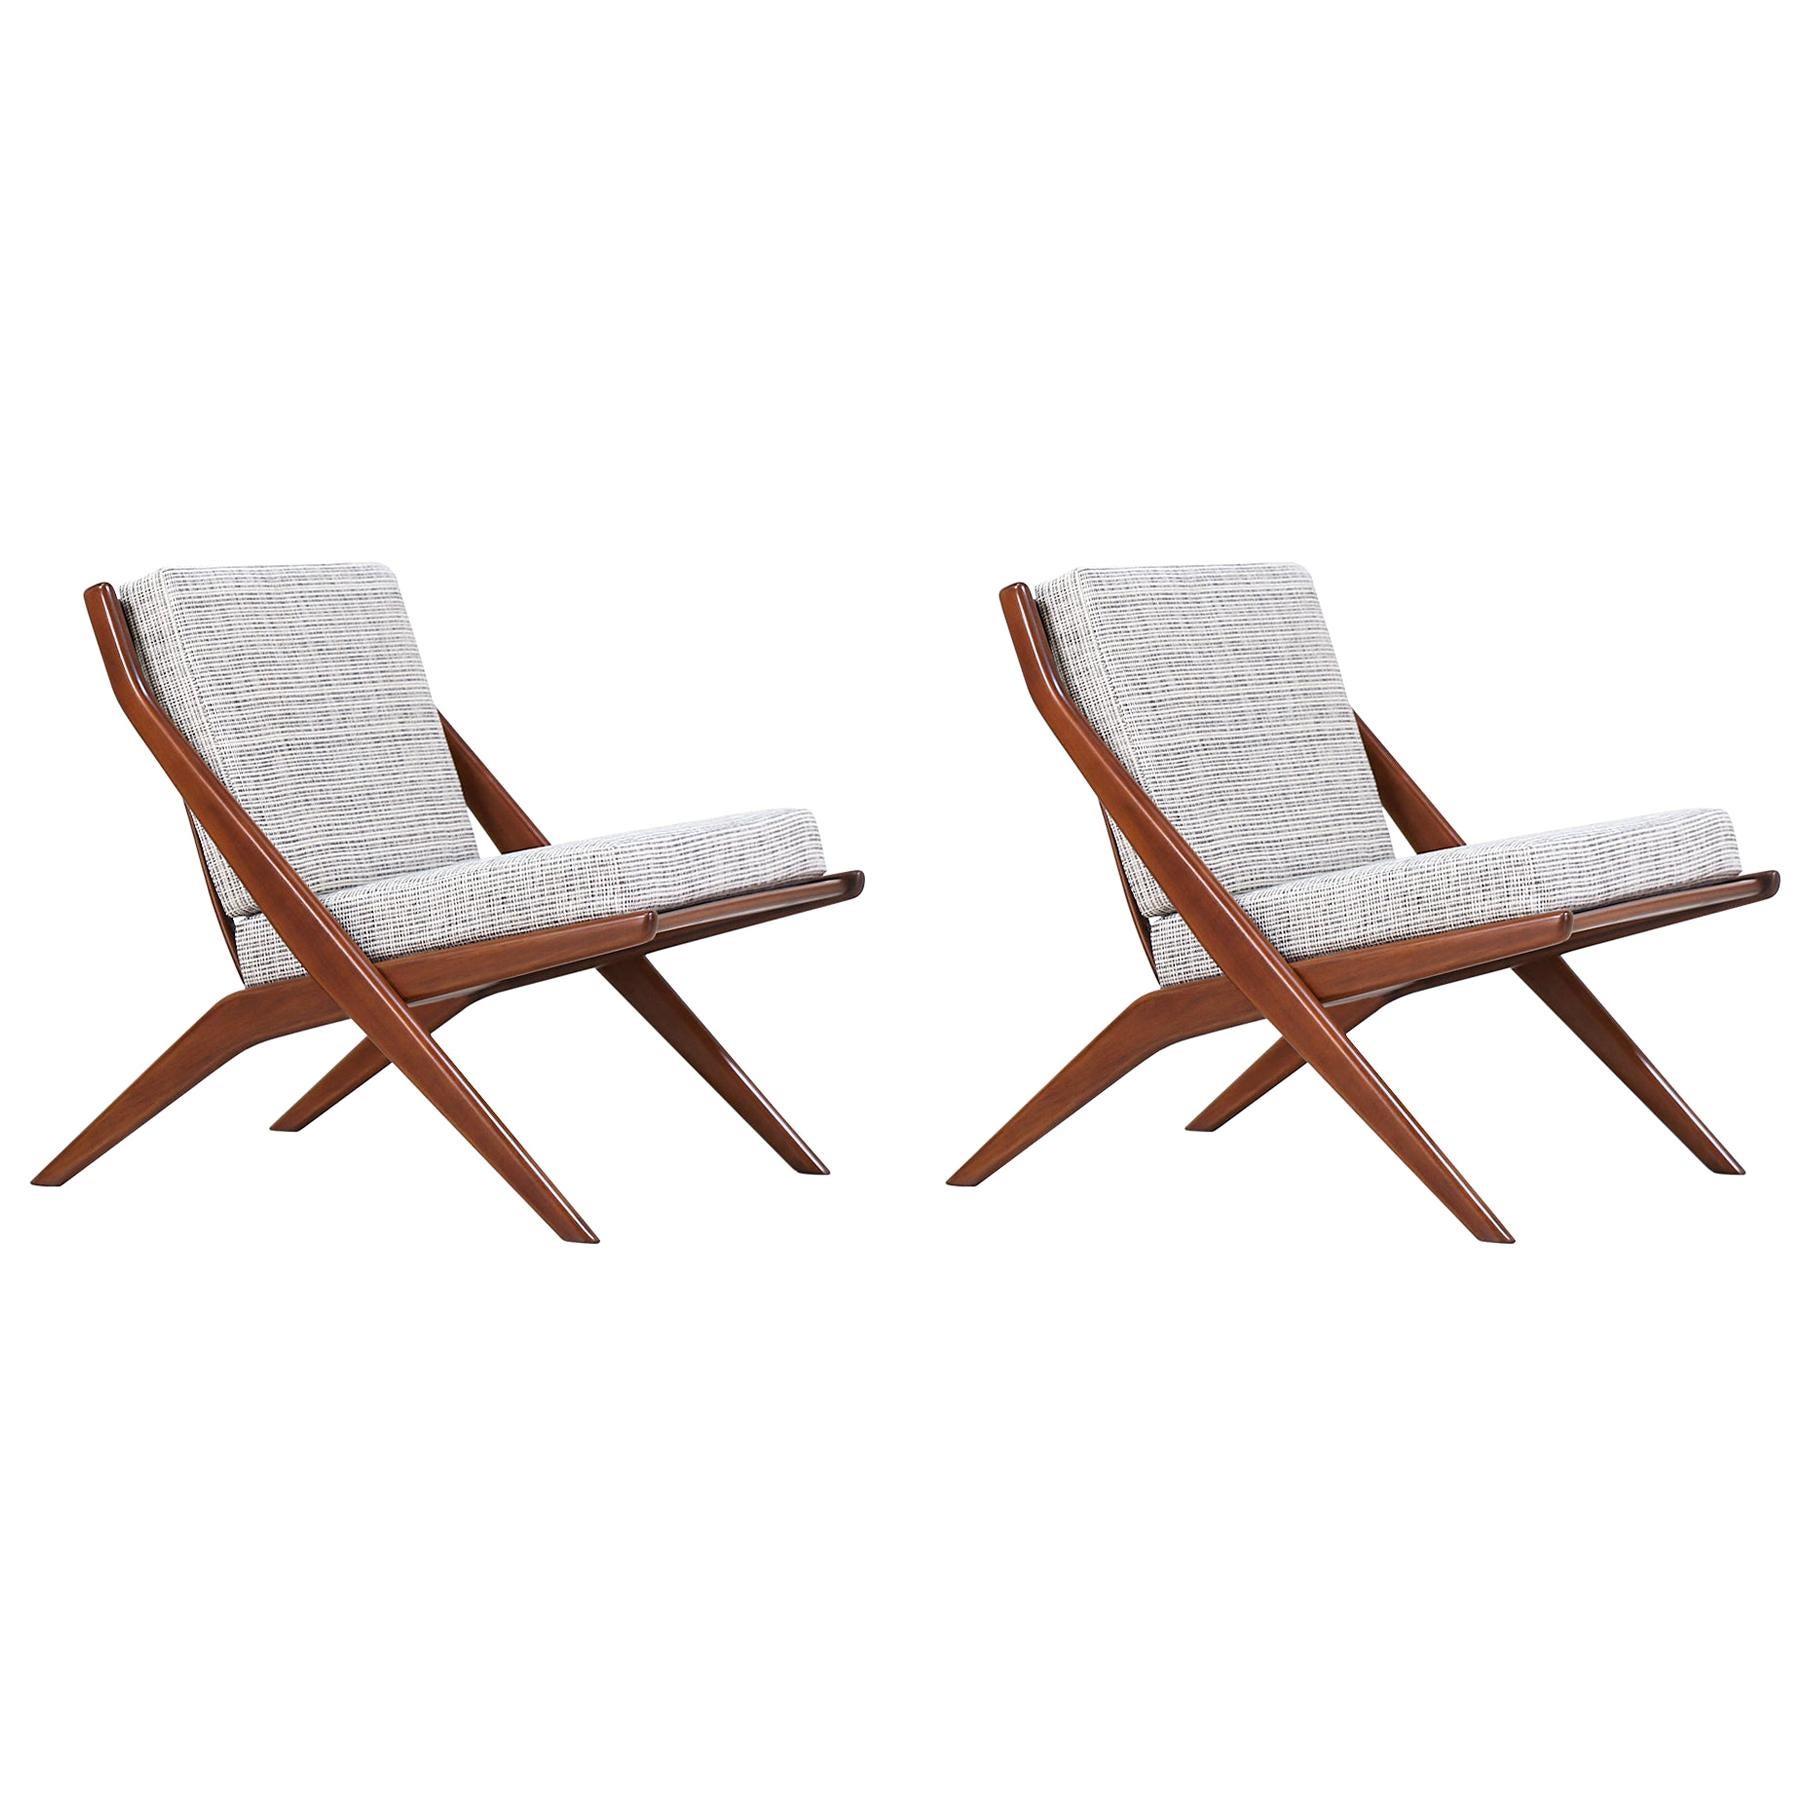 Pair of Folke Ohlsson "Scissor" Lounge Chairs for DUX